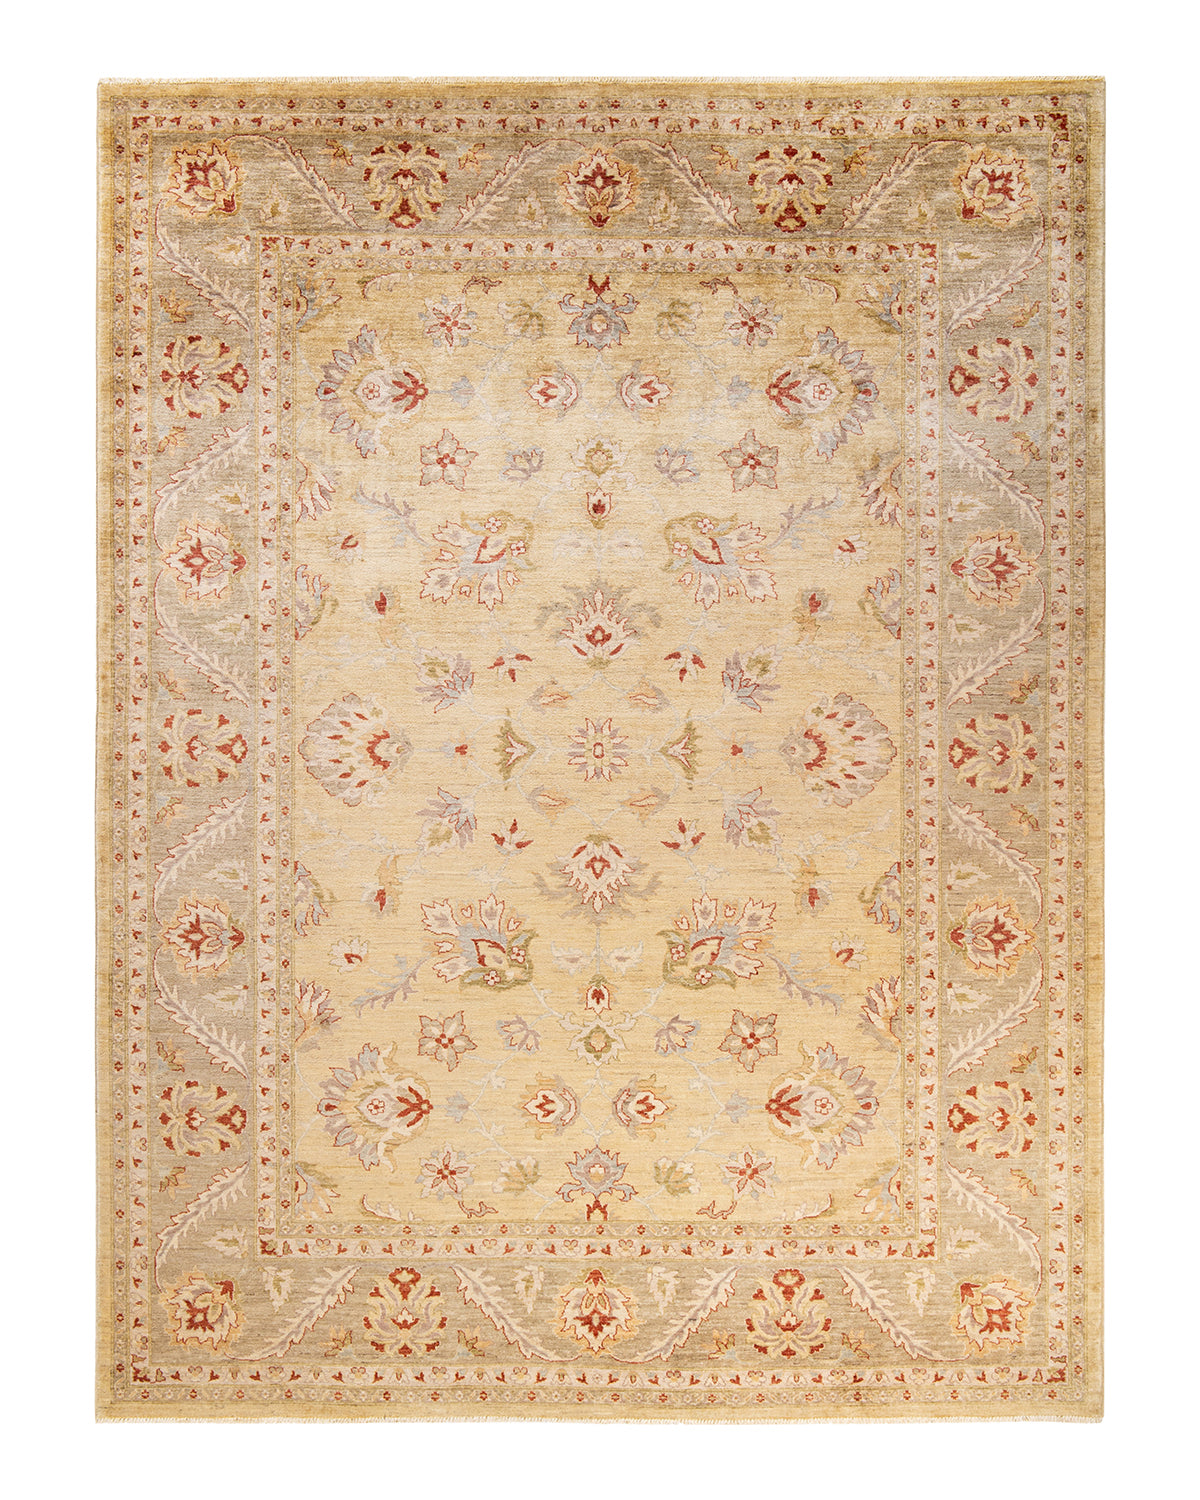 Eclectic, One-of-a-Kind Hand-Knotted Area Rug  - Ivory, 8' 7" x 11' 5"